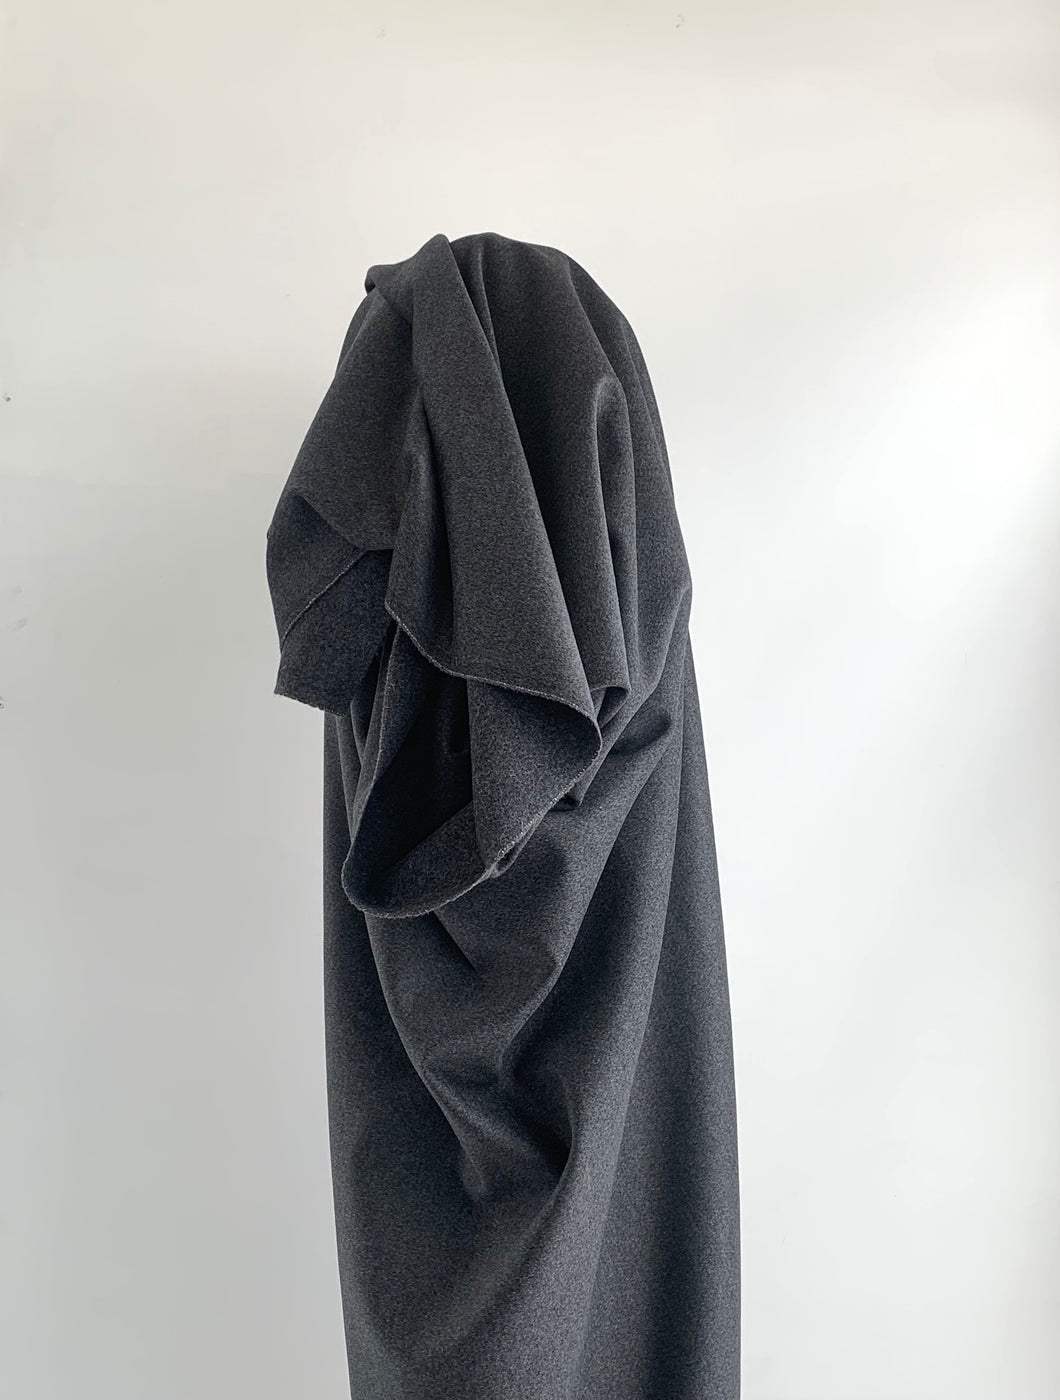 Charcoal Wool, Cashmere Blend fabric